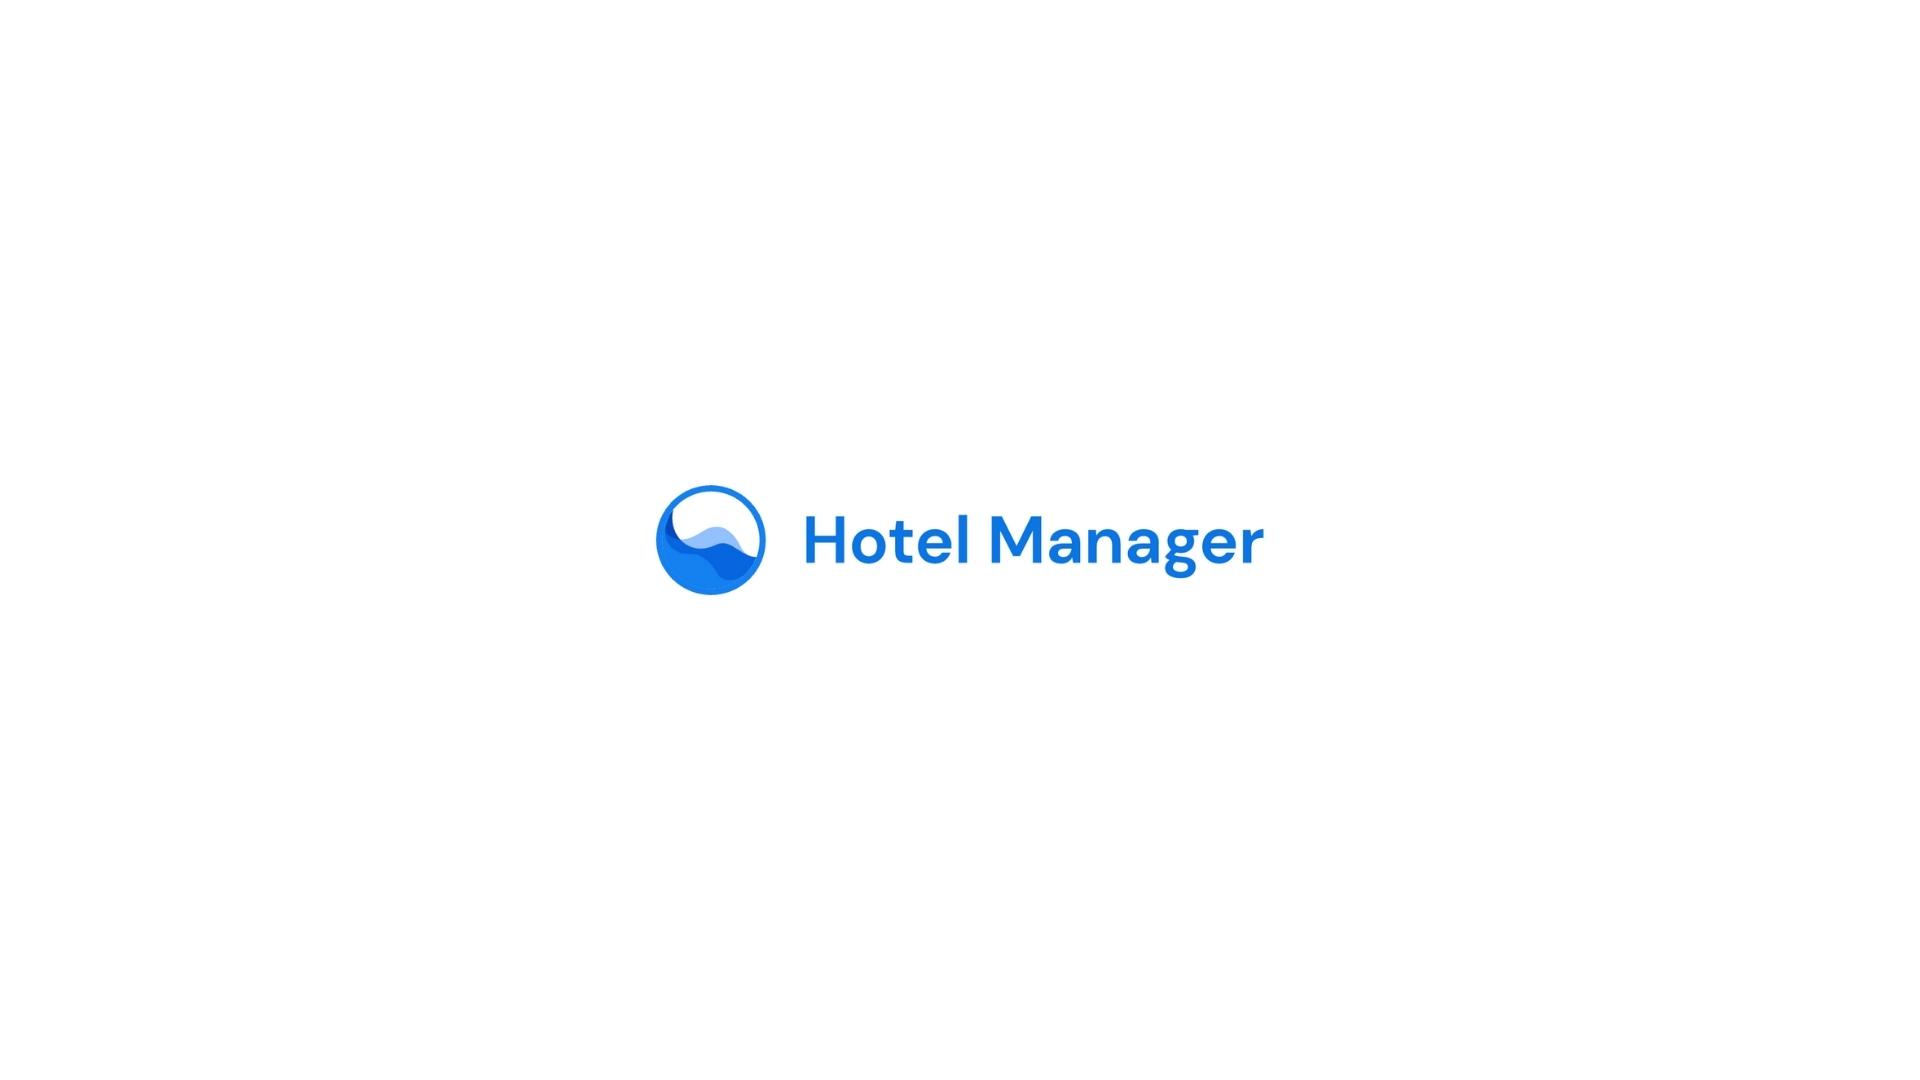 HotelManager